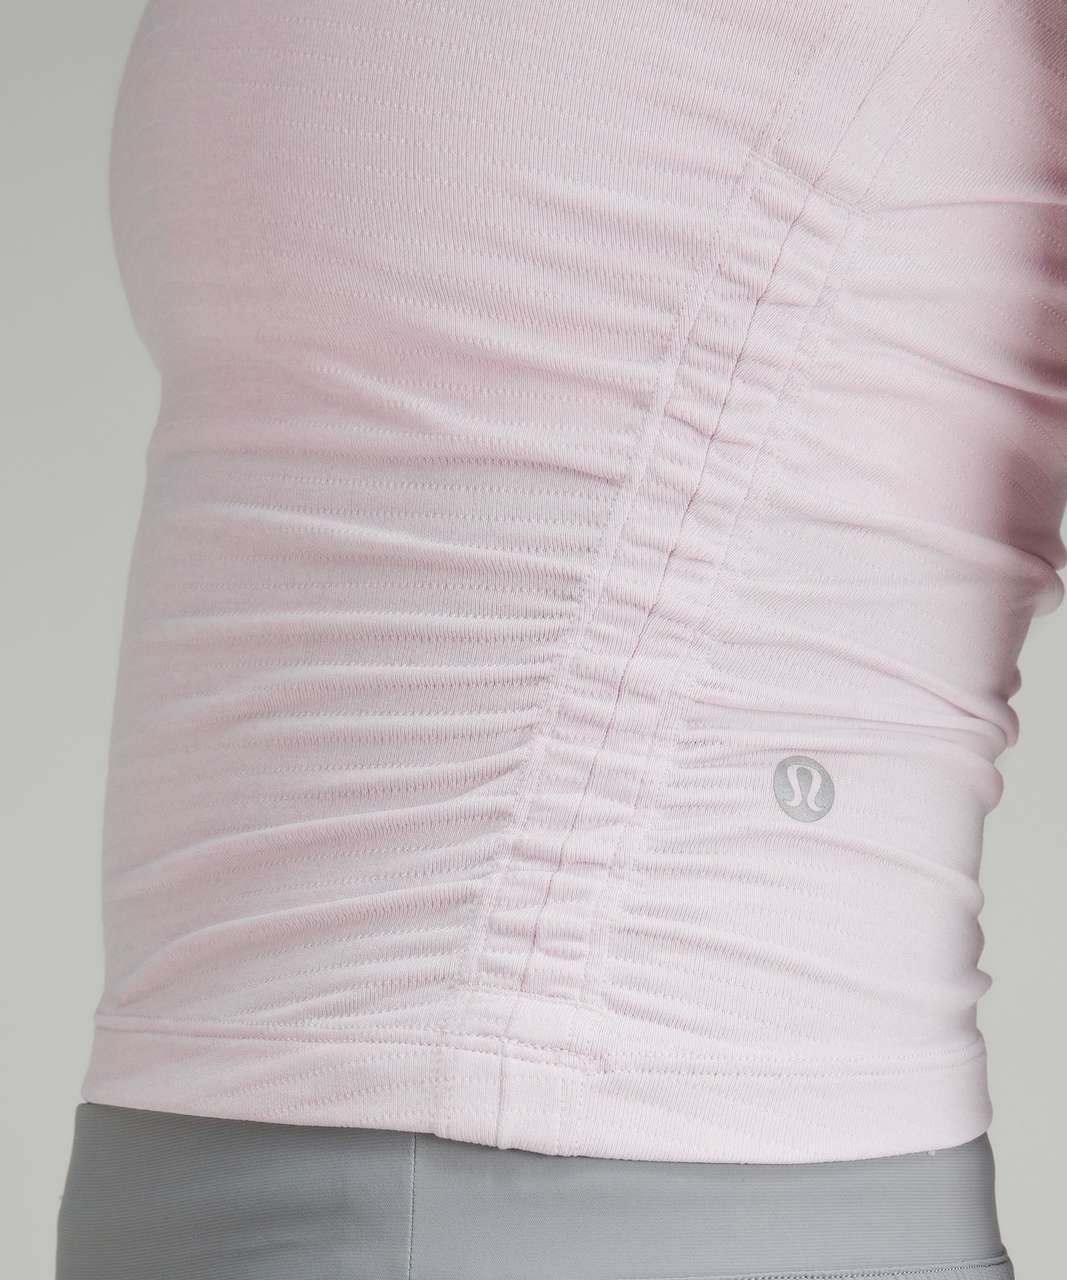 Lululemon License to Train Tight-Fit Tank Top - Heathered Meadowsweet Pink